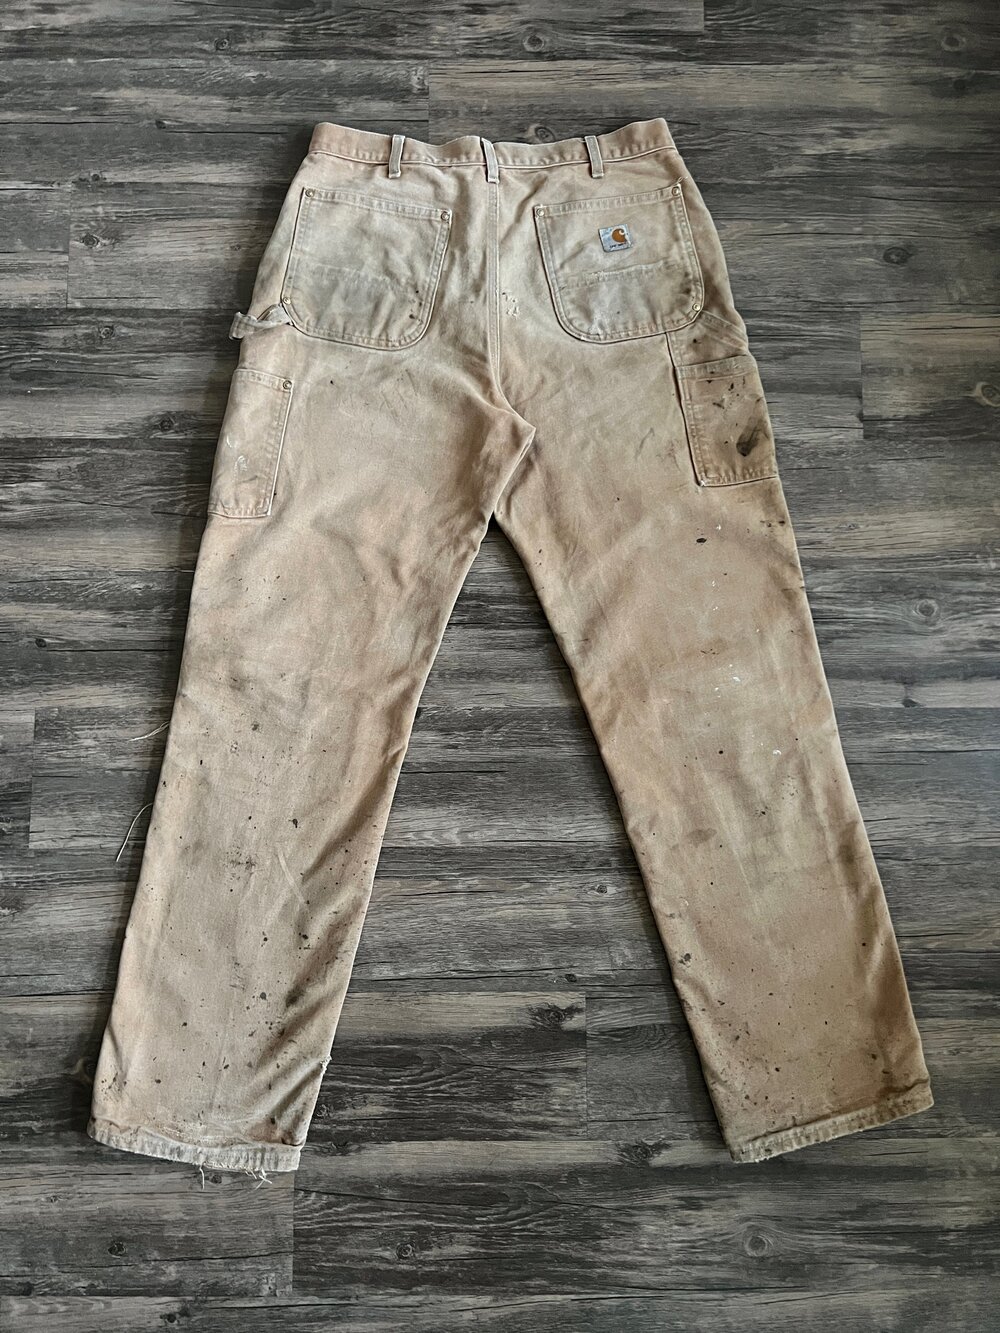 Vintage Carhartt Carpenter Double Knee Pants Size 34x31 Made in USA